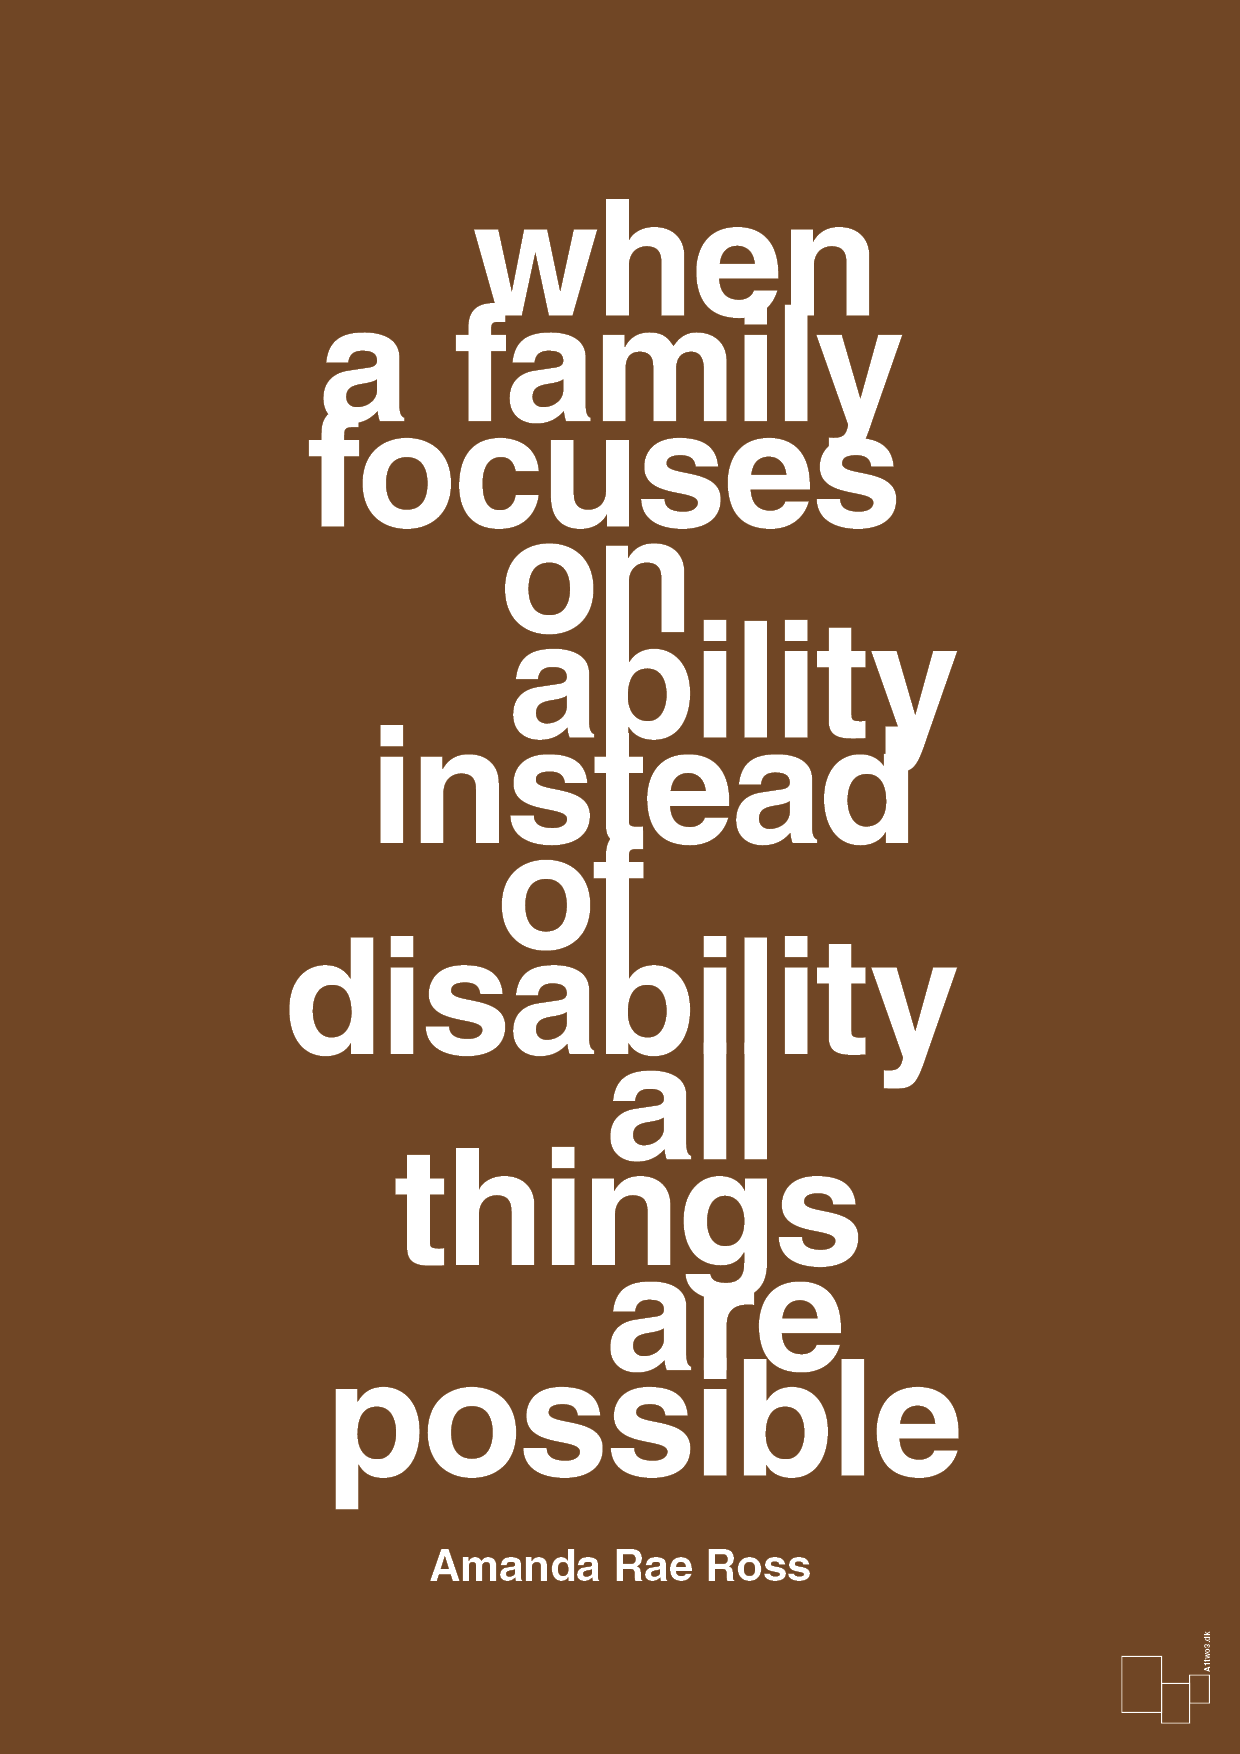 when a family focuses on ability instead of disability all things are possible - Plakat med Samfund i Dark Brown